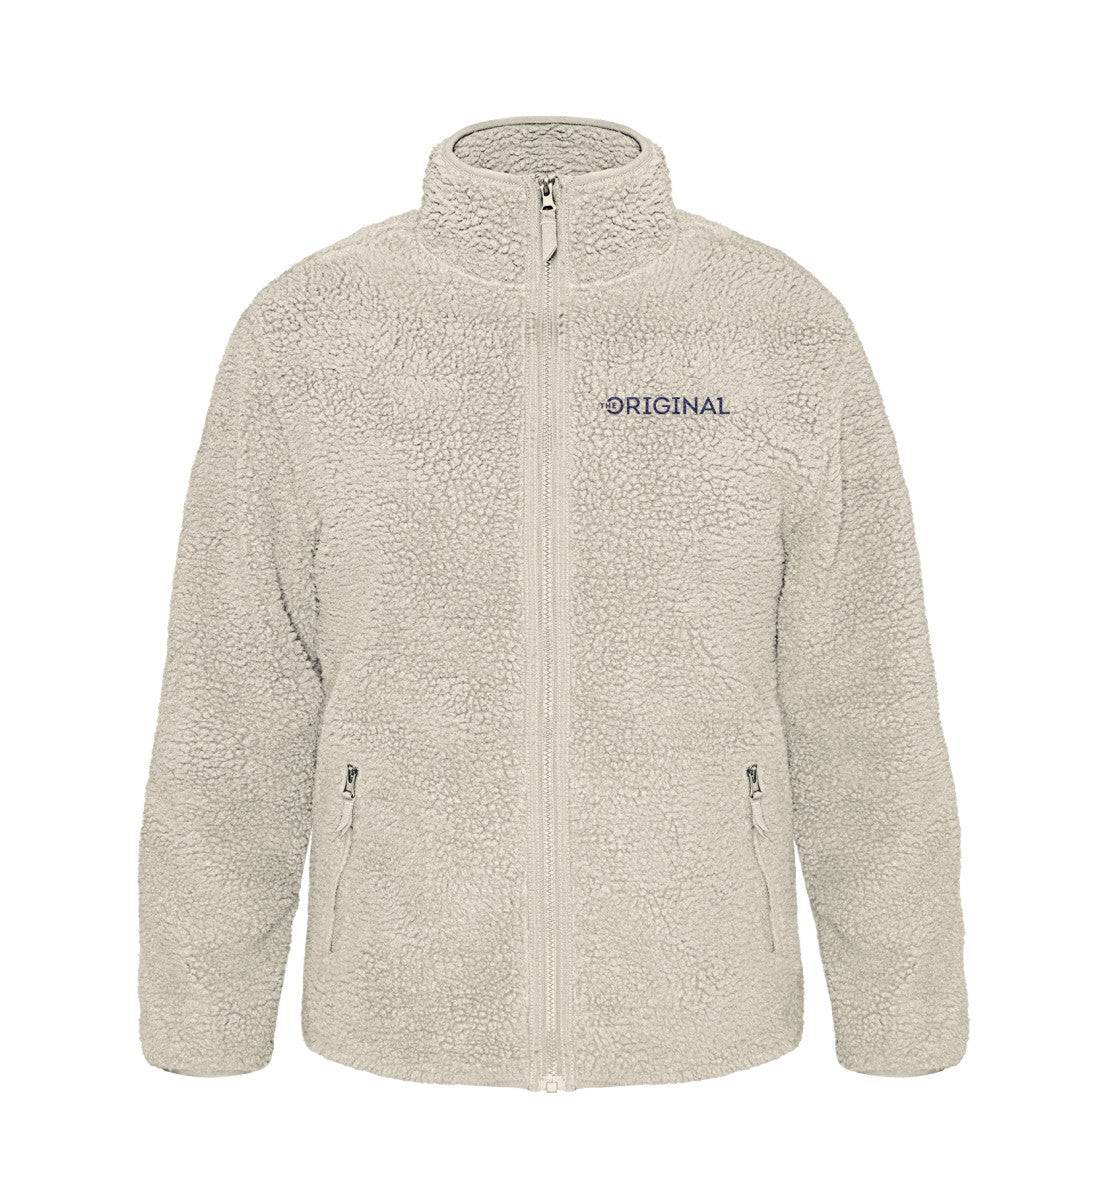 Sherpa Jacket  - with Embroidery | The Original One